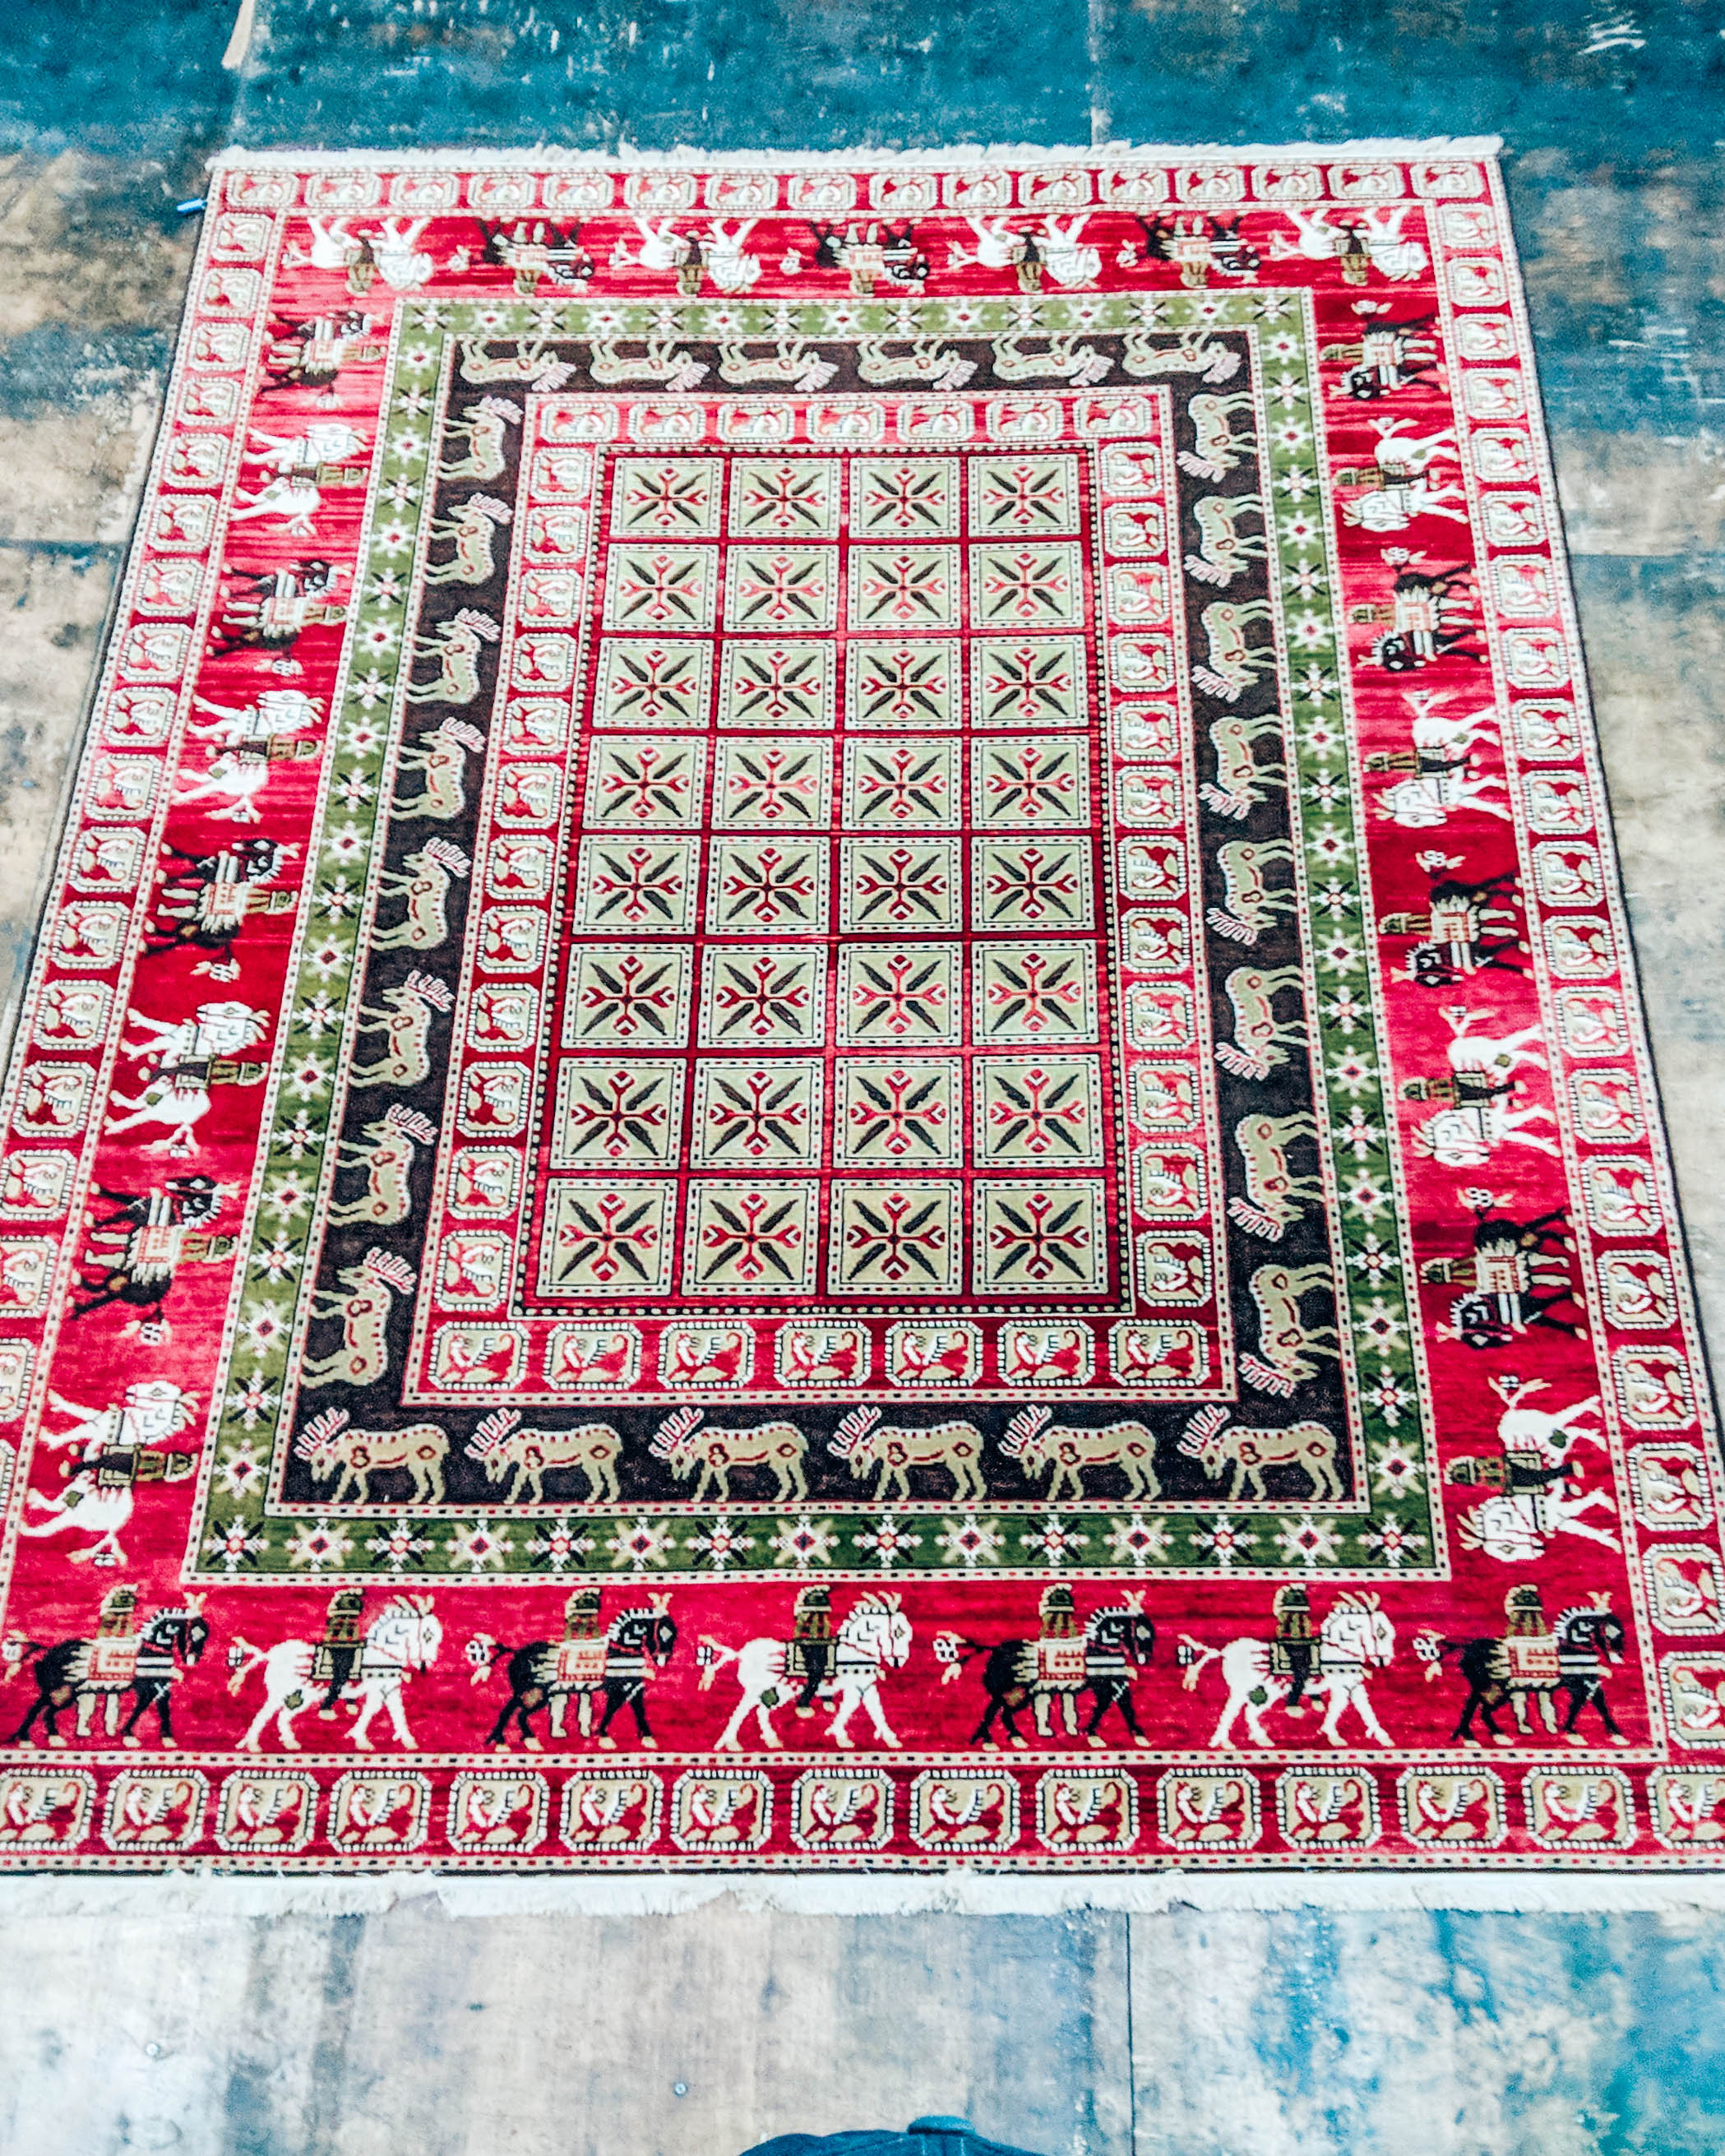 Armenian rug Megerian carpet company museum replica oldest rug in the world